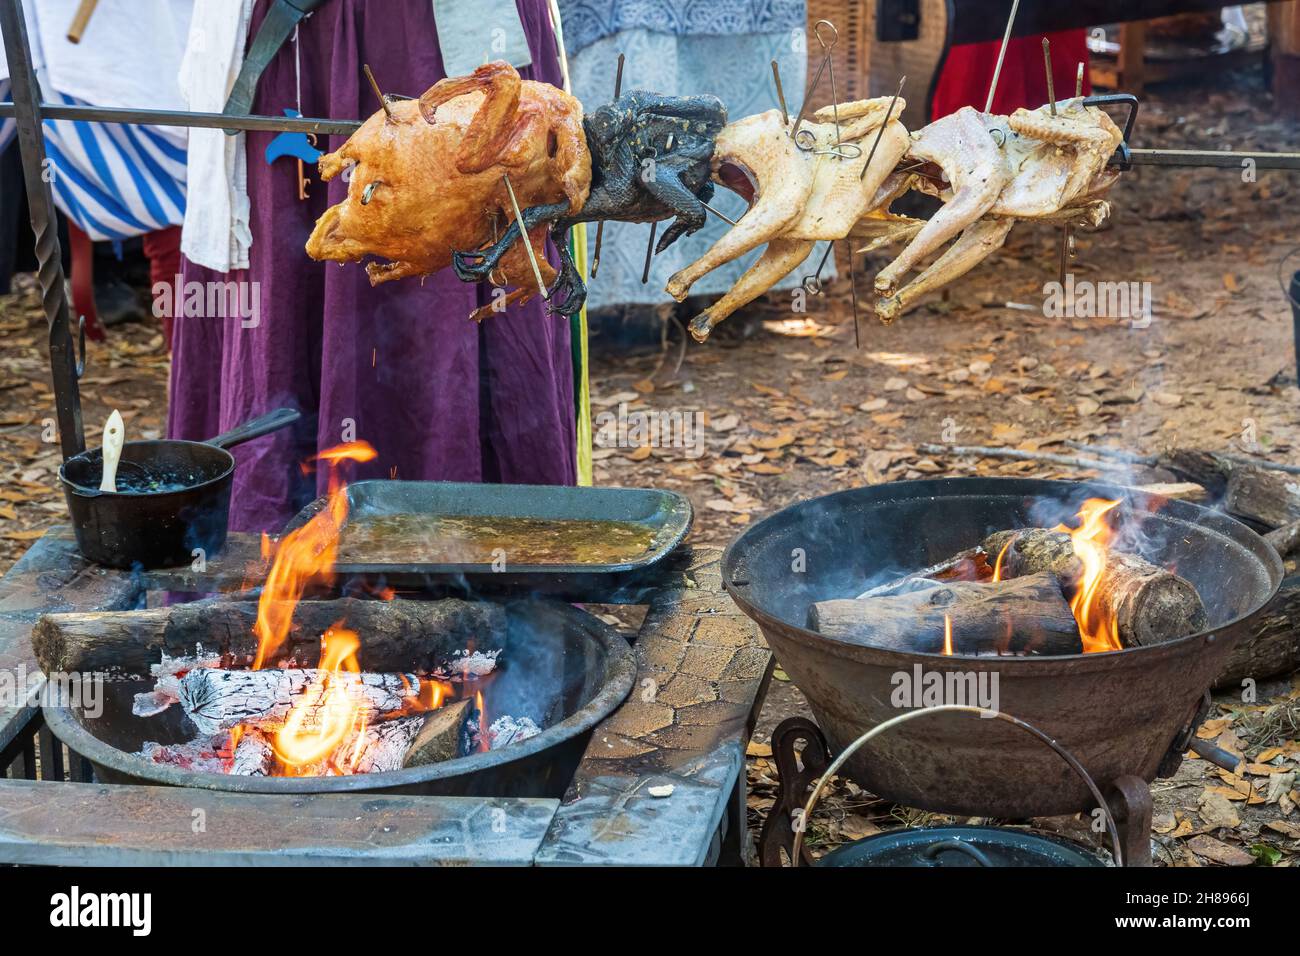 Rotisserie cooked birds on a spit over open flame fire pits - Florida, USA Stock Photo